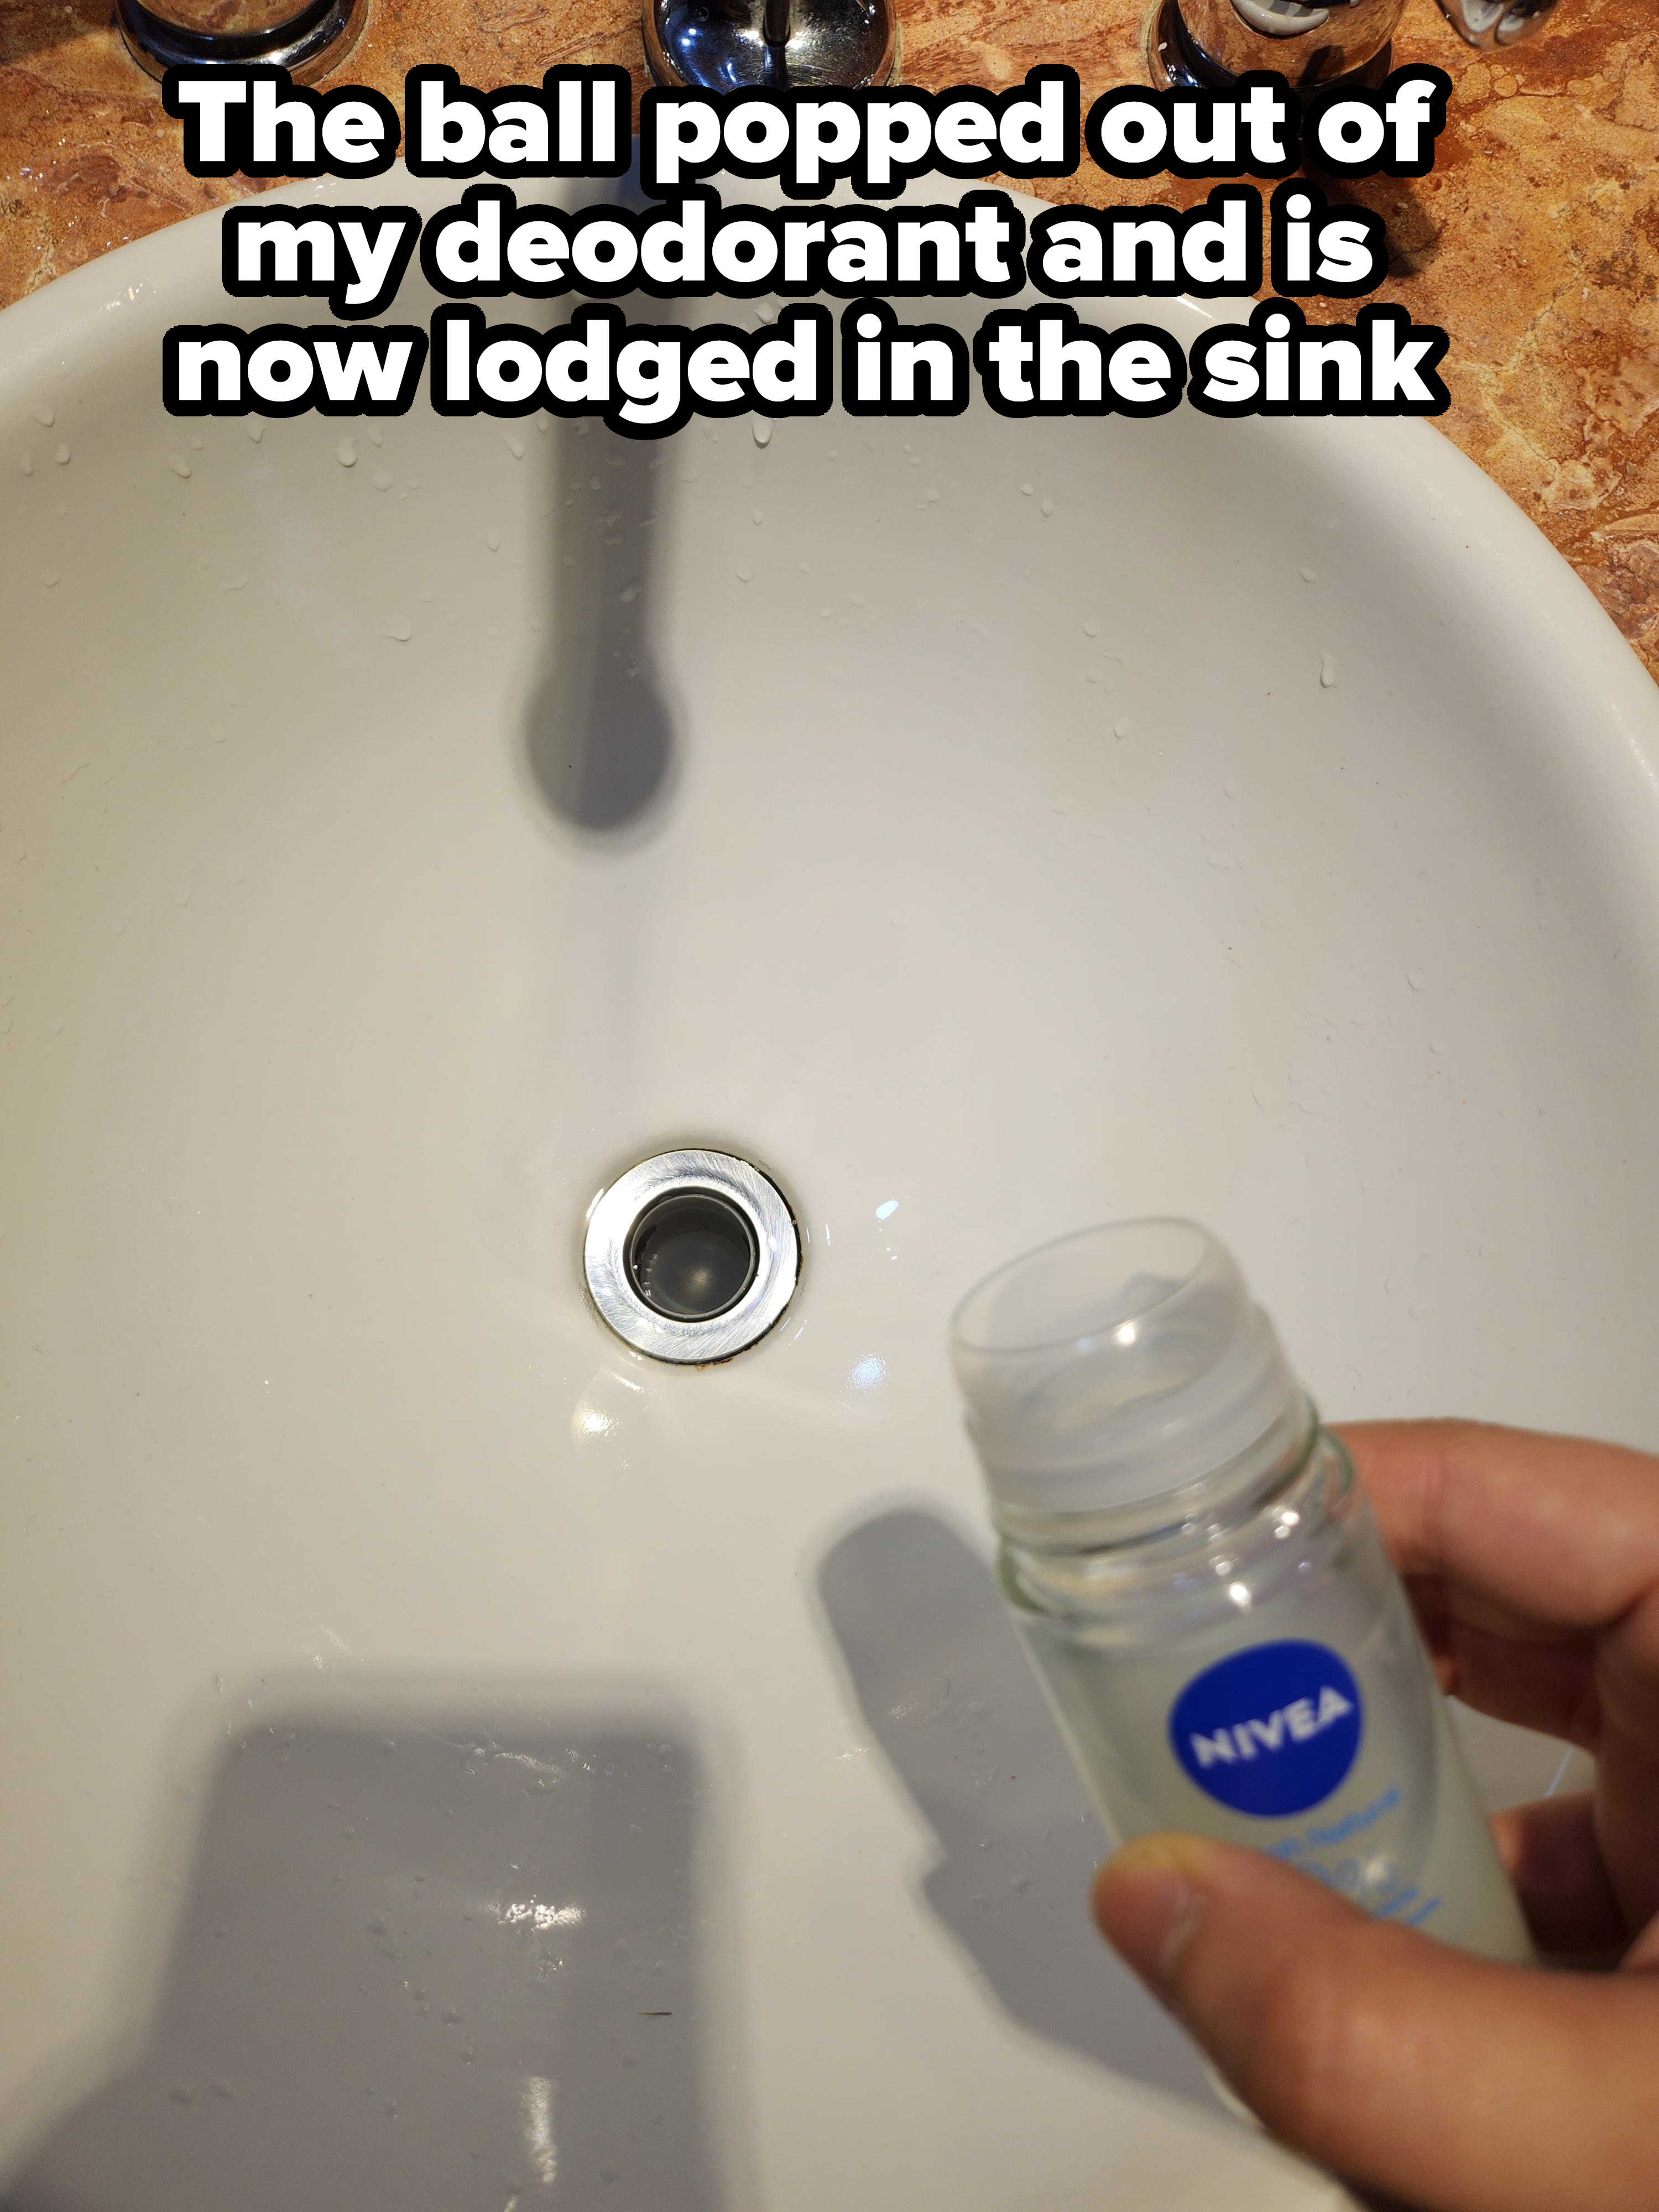 The ball of a roll-on deodorant stuck in the sink hole